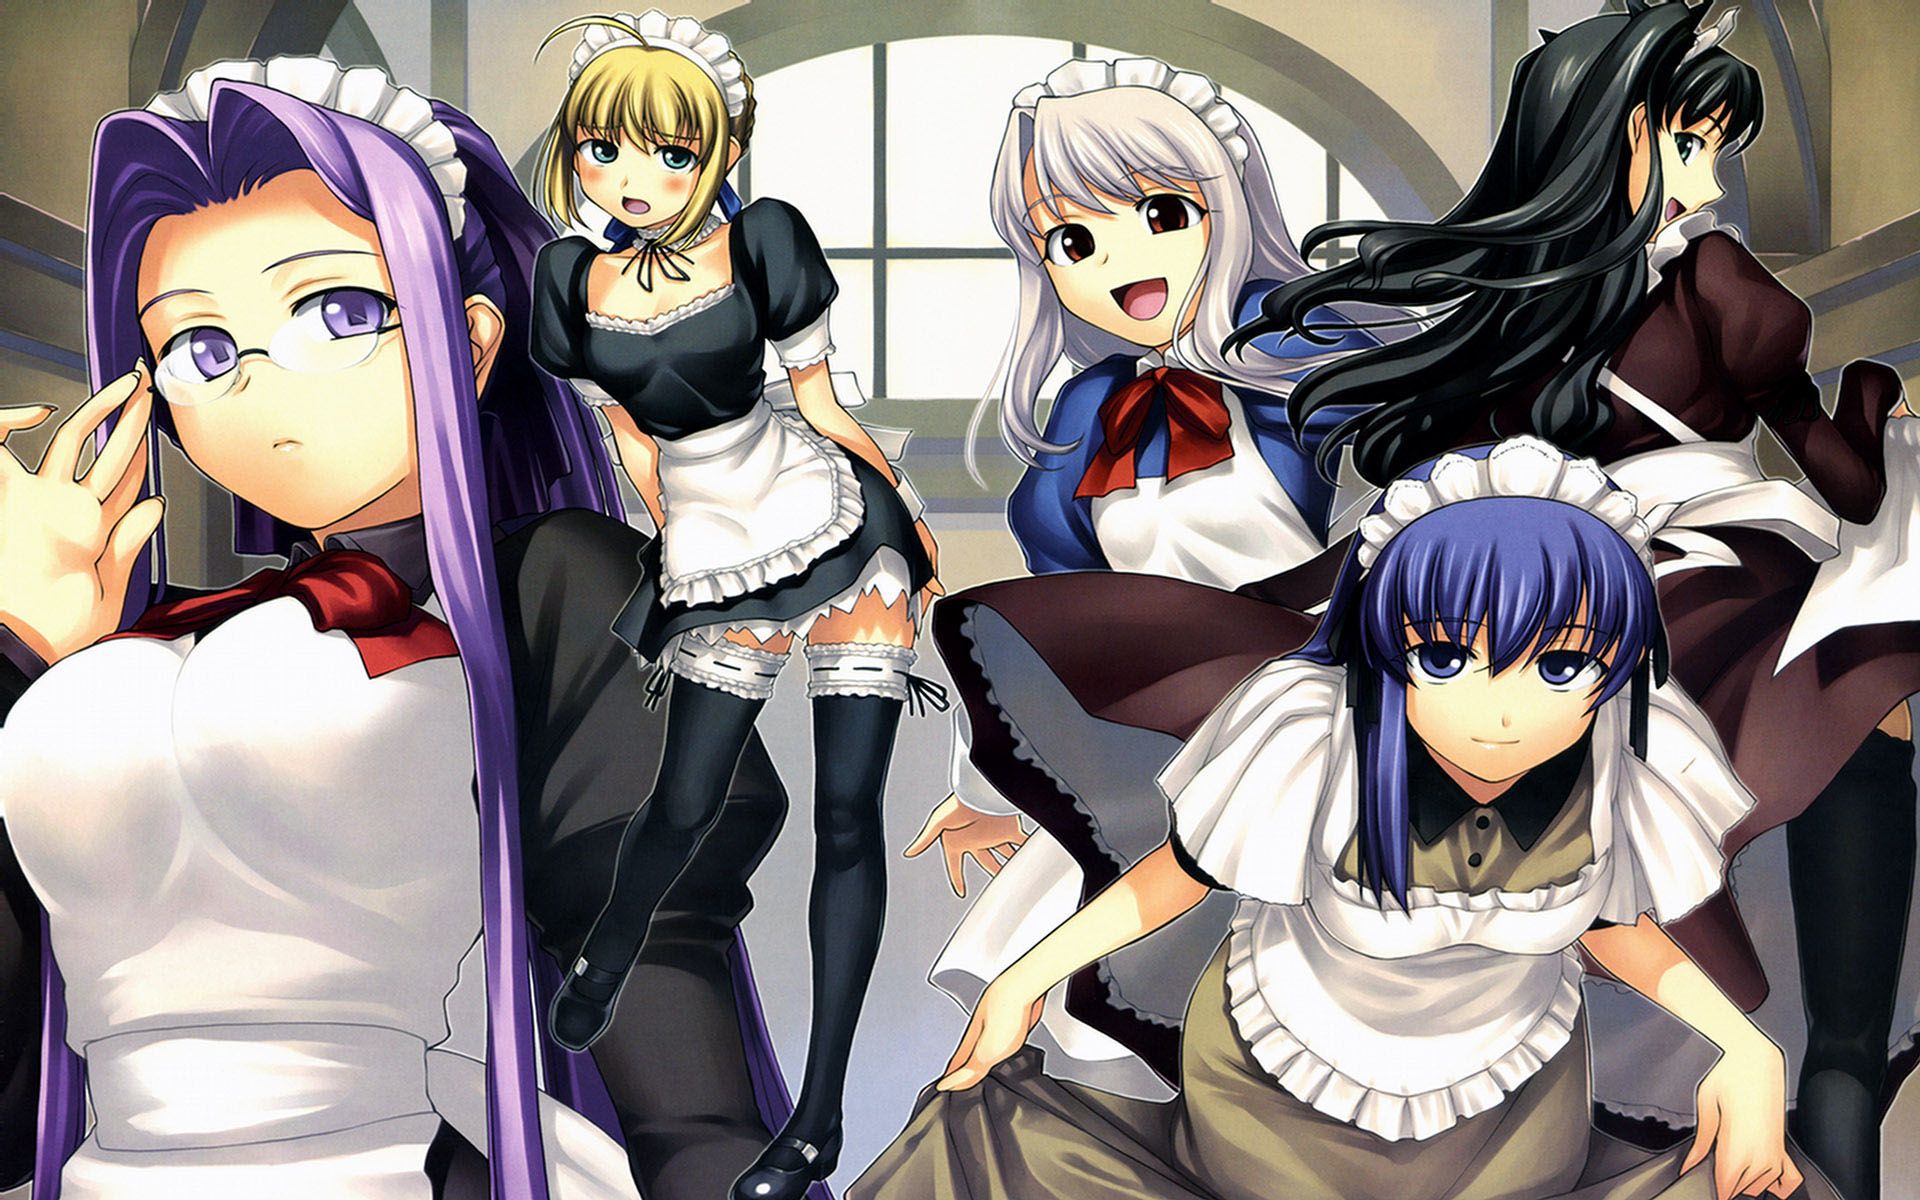 Moe in Maid Outfits, Anime Wallpaper